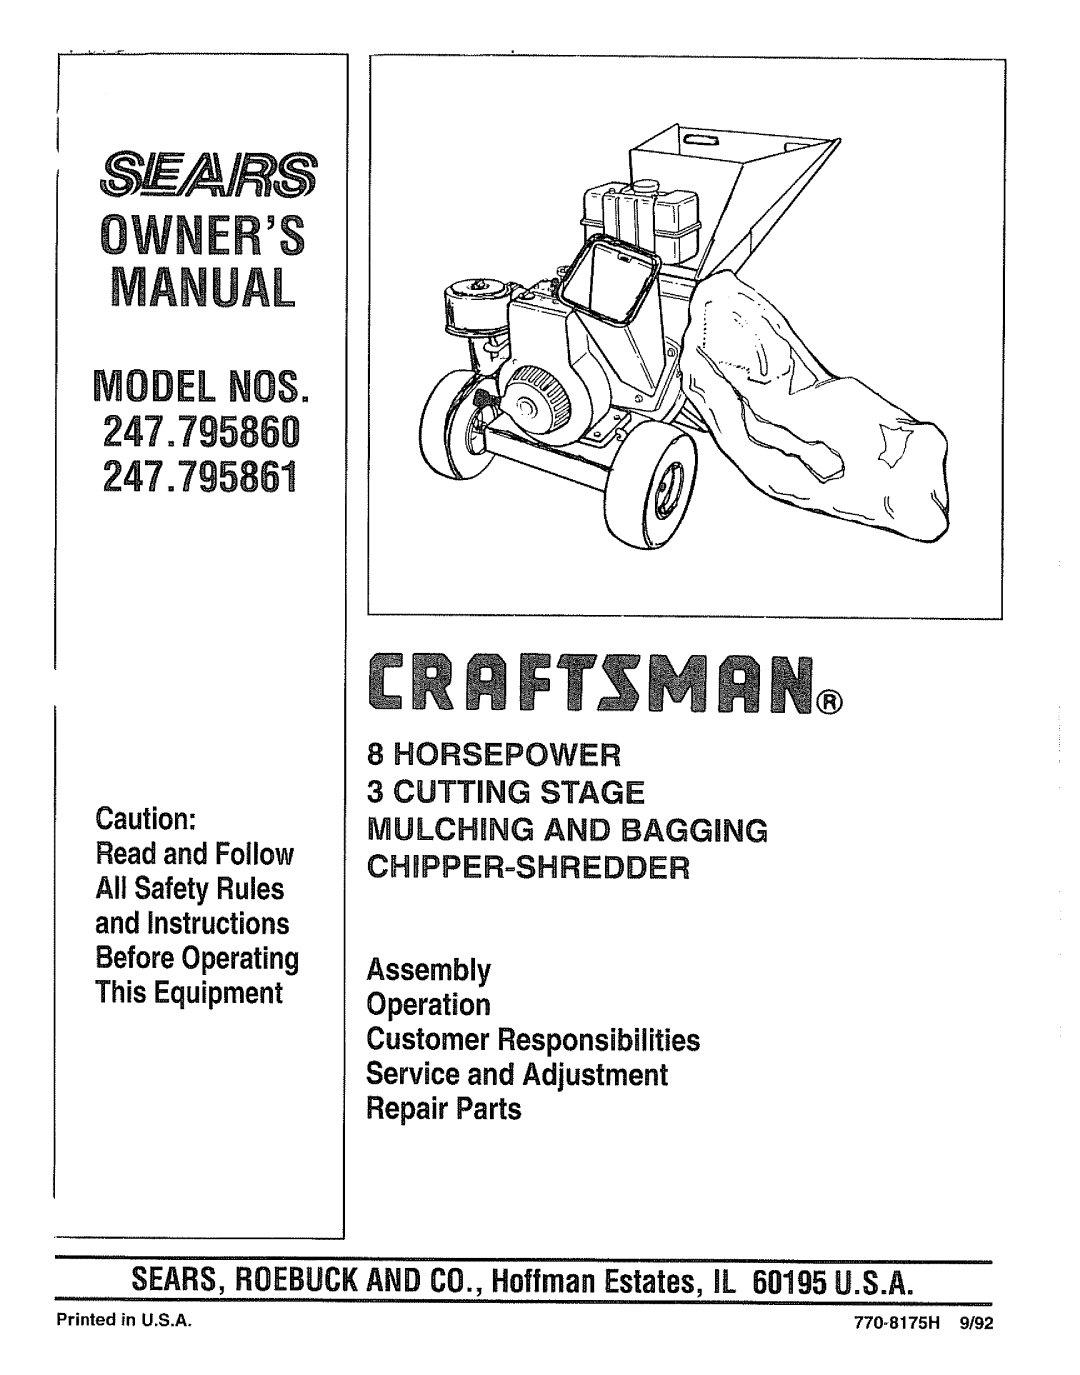 Craftsman 247.795861 owner manual Caution: ReadandFollow, All SafetyRules andInstructions, BeforeOperating ThisEquipment 